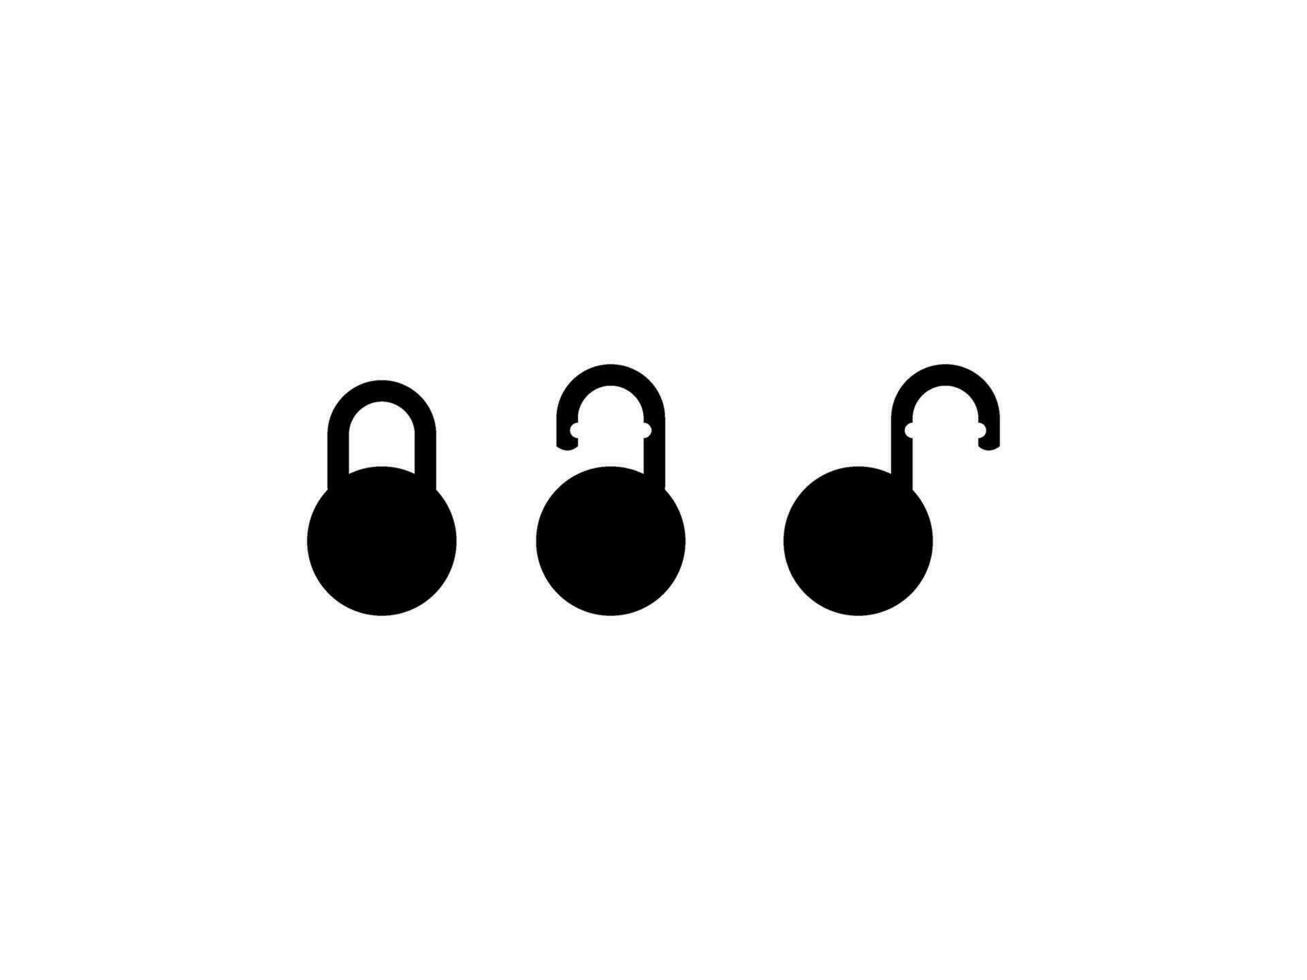 Set of the Closed and Open Padlock Silhouette, Flat Style, can use for Art Illustration, Pictogram, Logo Gram, Website or Graphic Design Element. Vector Illustration